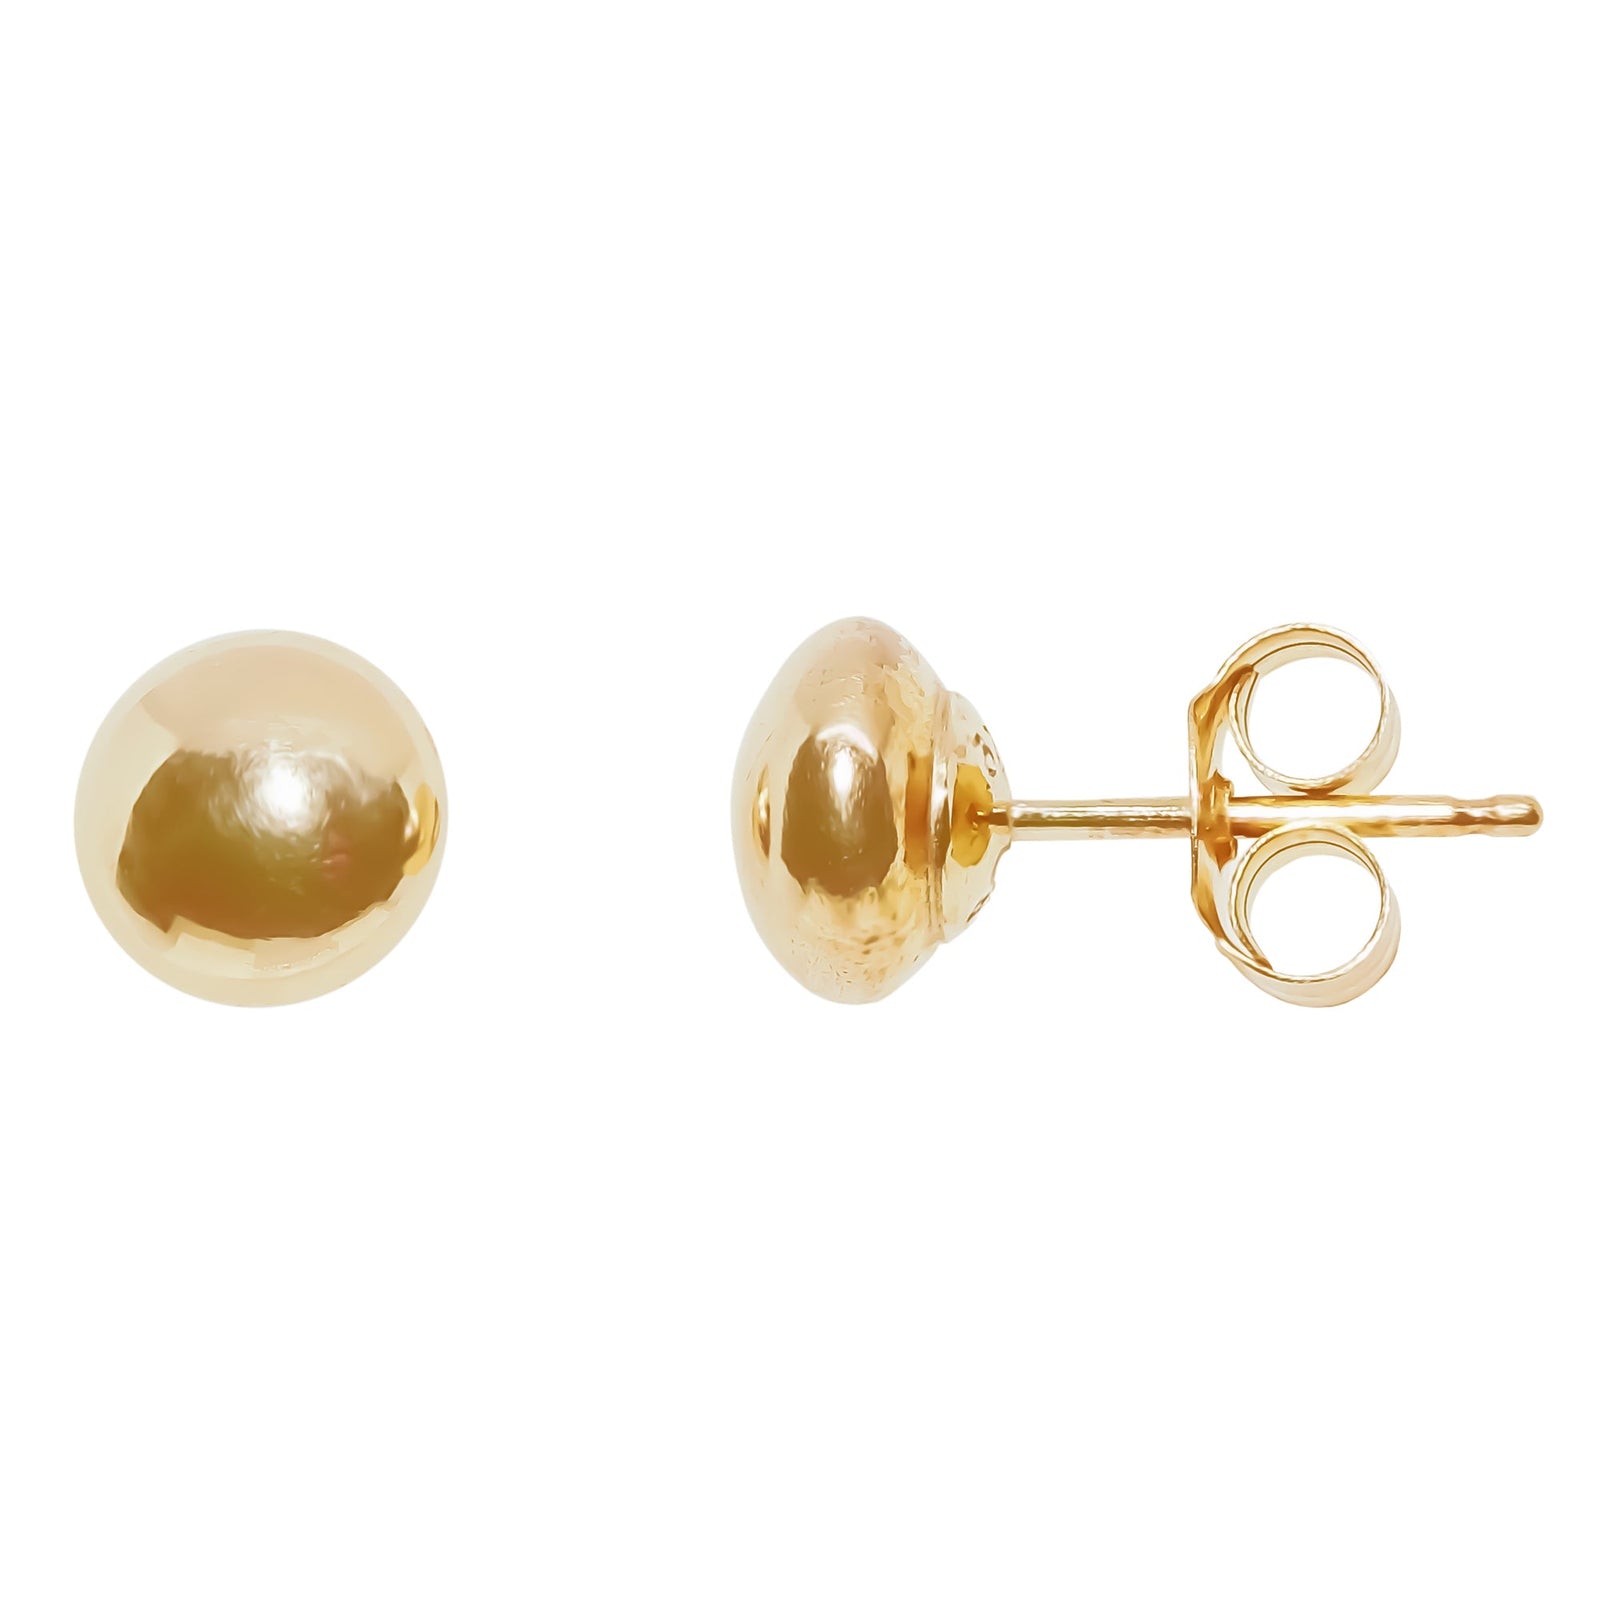 9ct gold 5mm bouton stud earrings